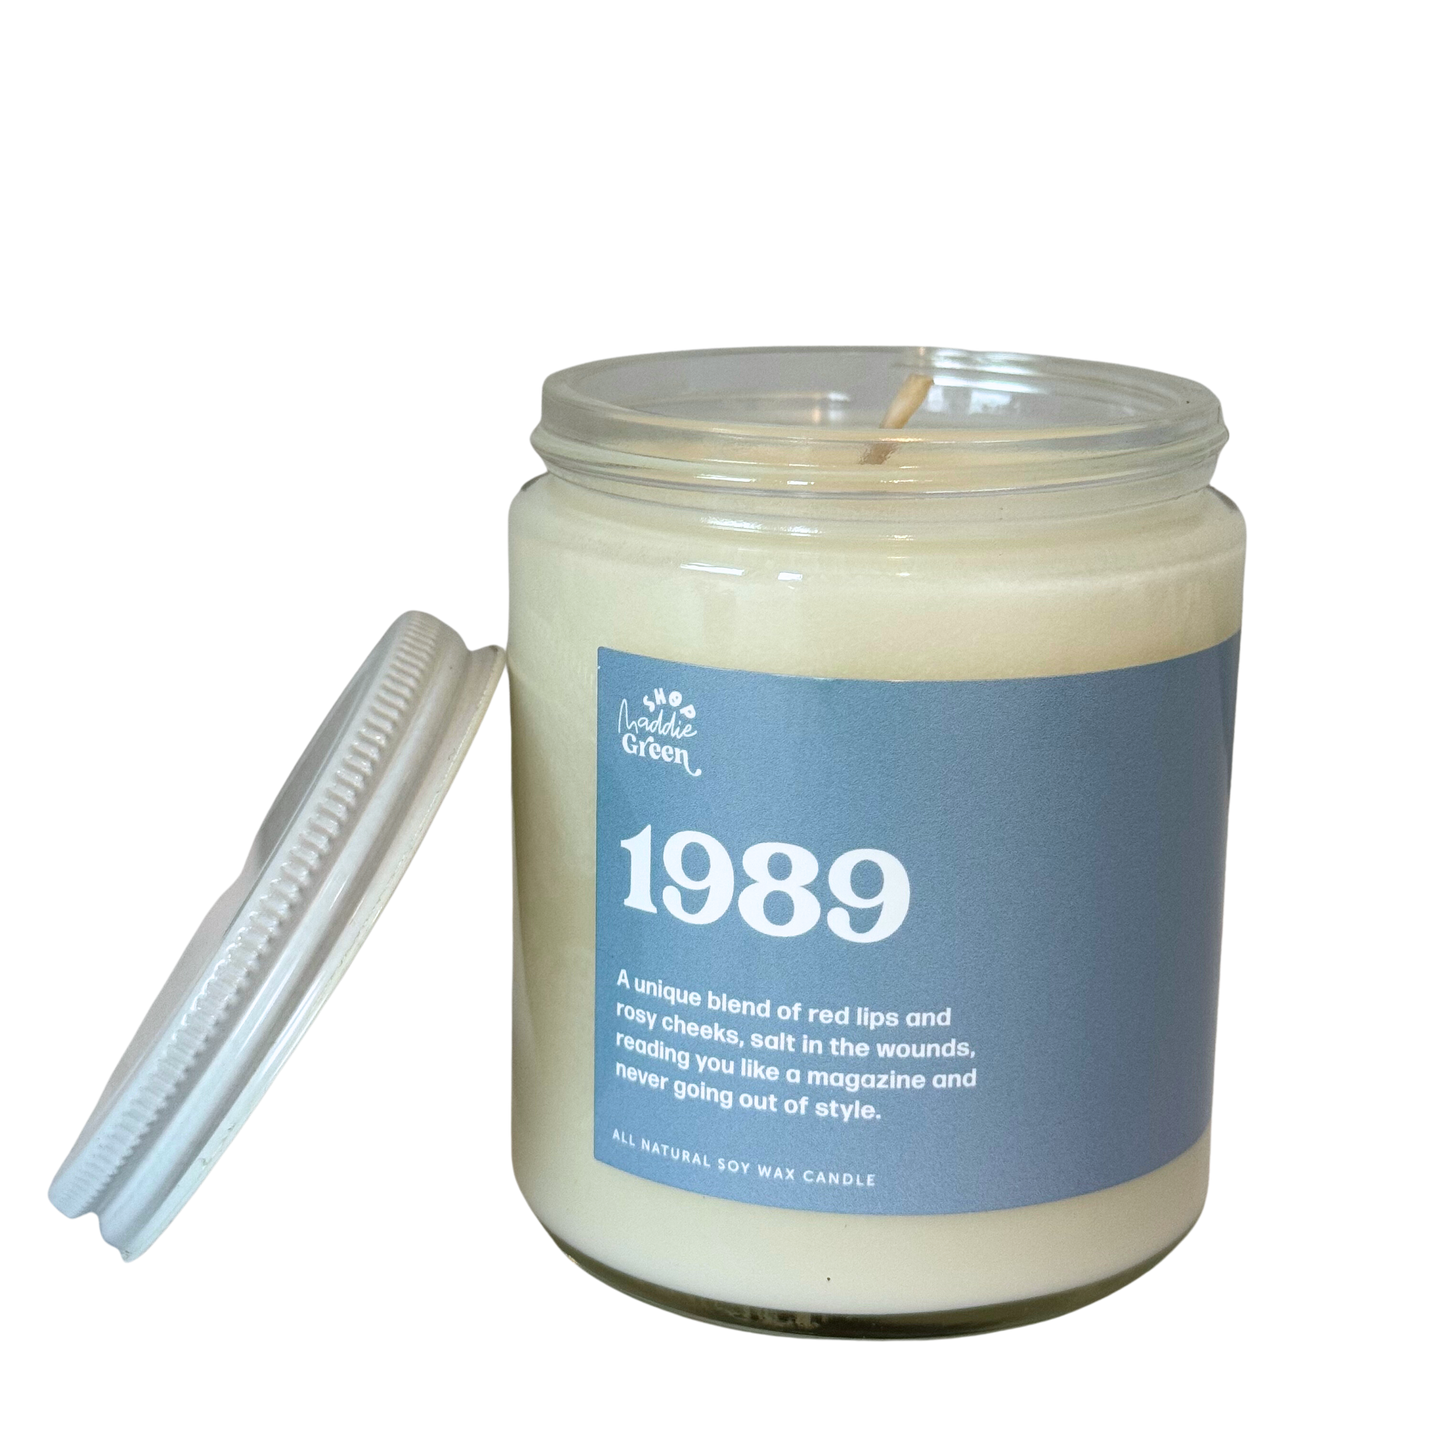 1989 Taylors Version Soy Candle